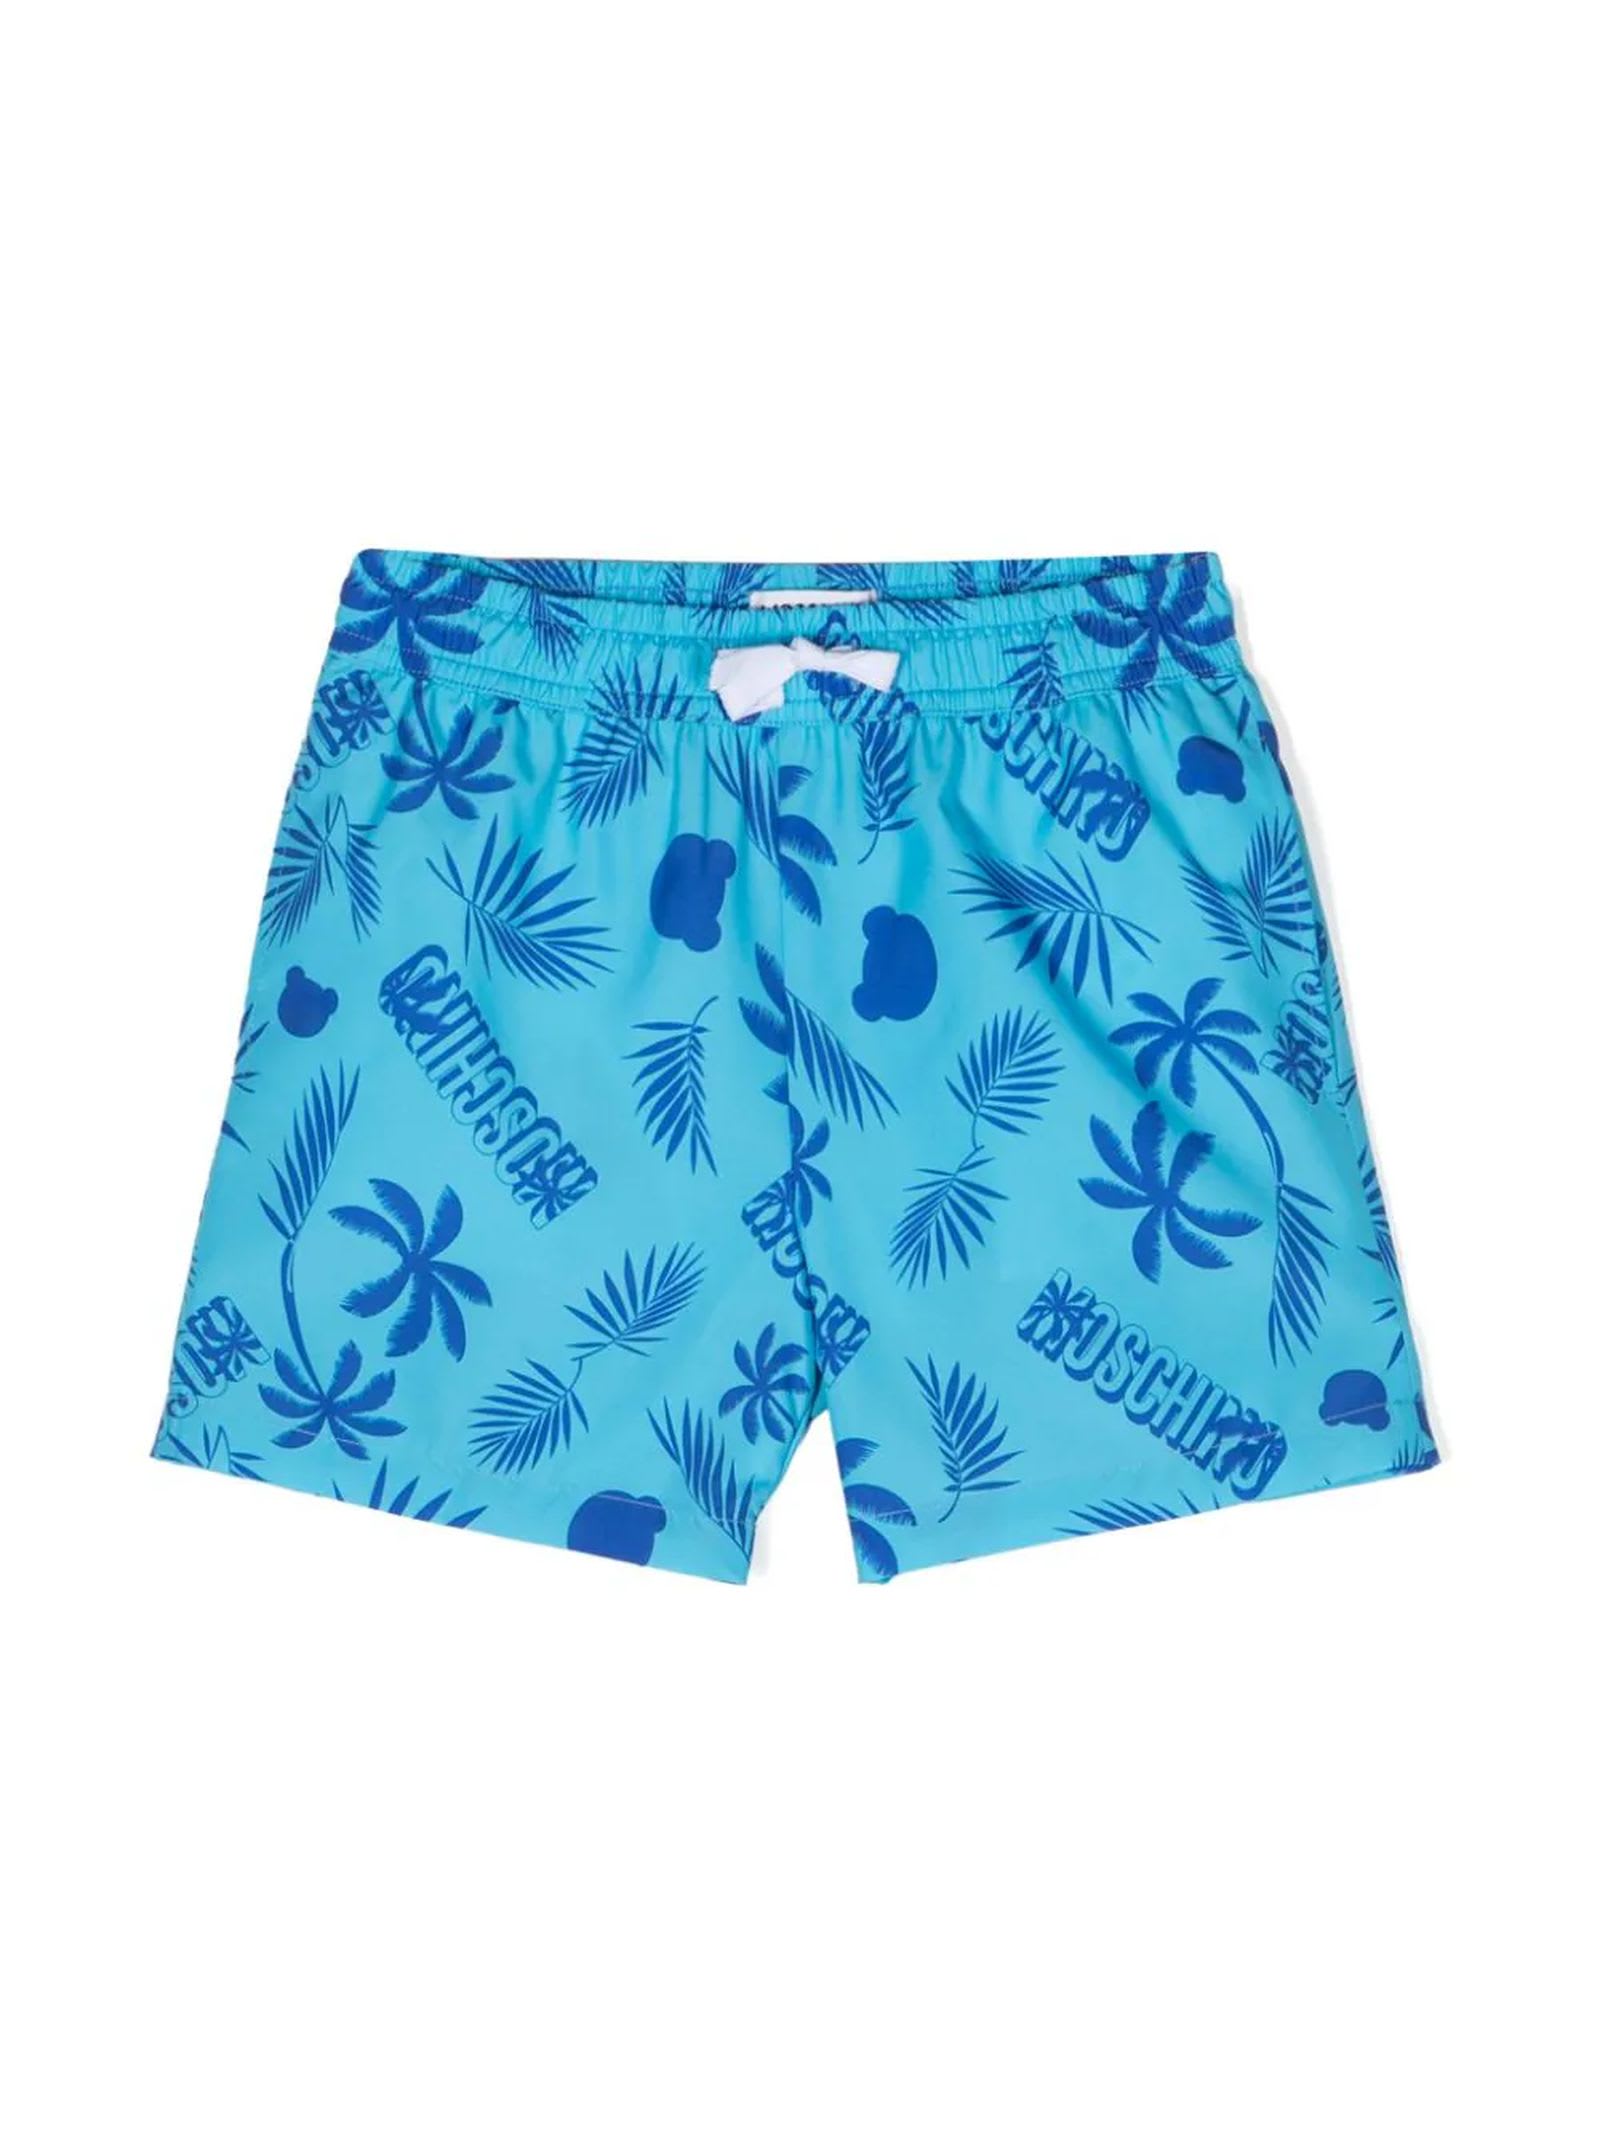 MOSCHINO BLUE POLYESTER SWIMSUIT